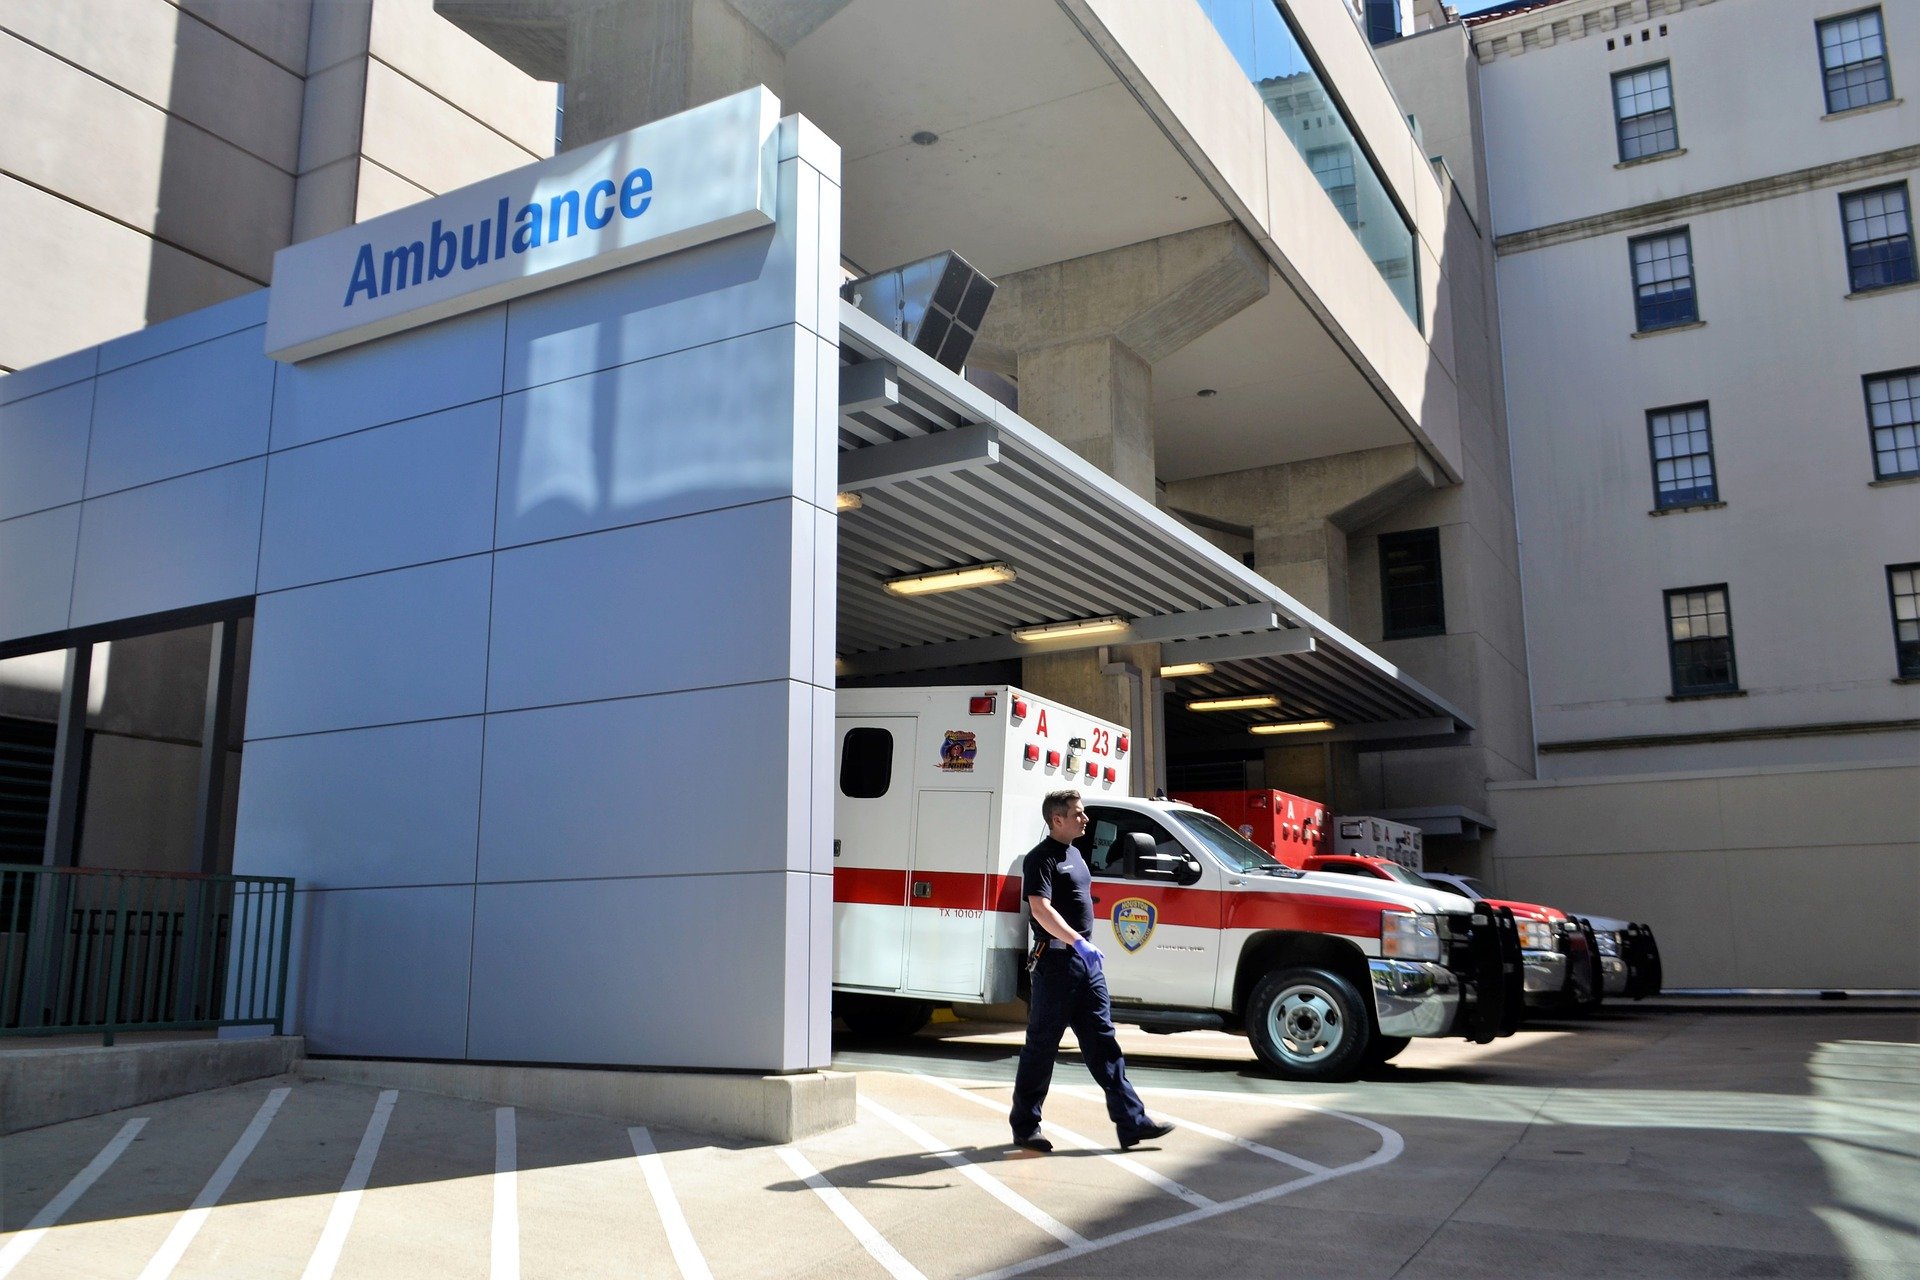 Pictured - An image of an emergency room with ambulances and a first responder outside | Source: Pixabay 